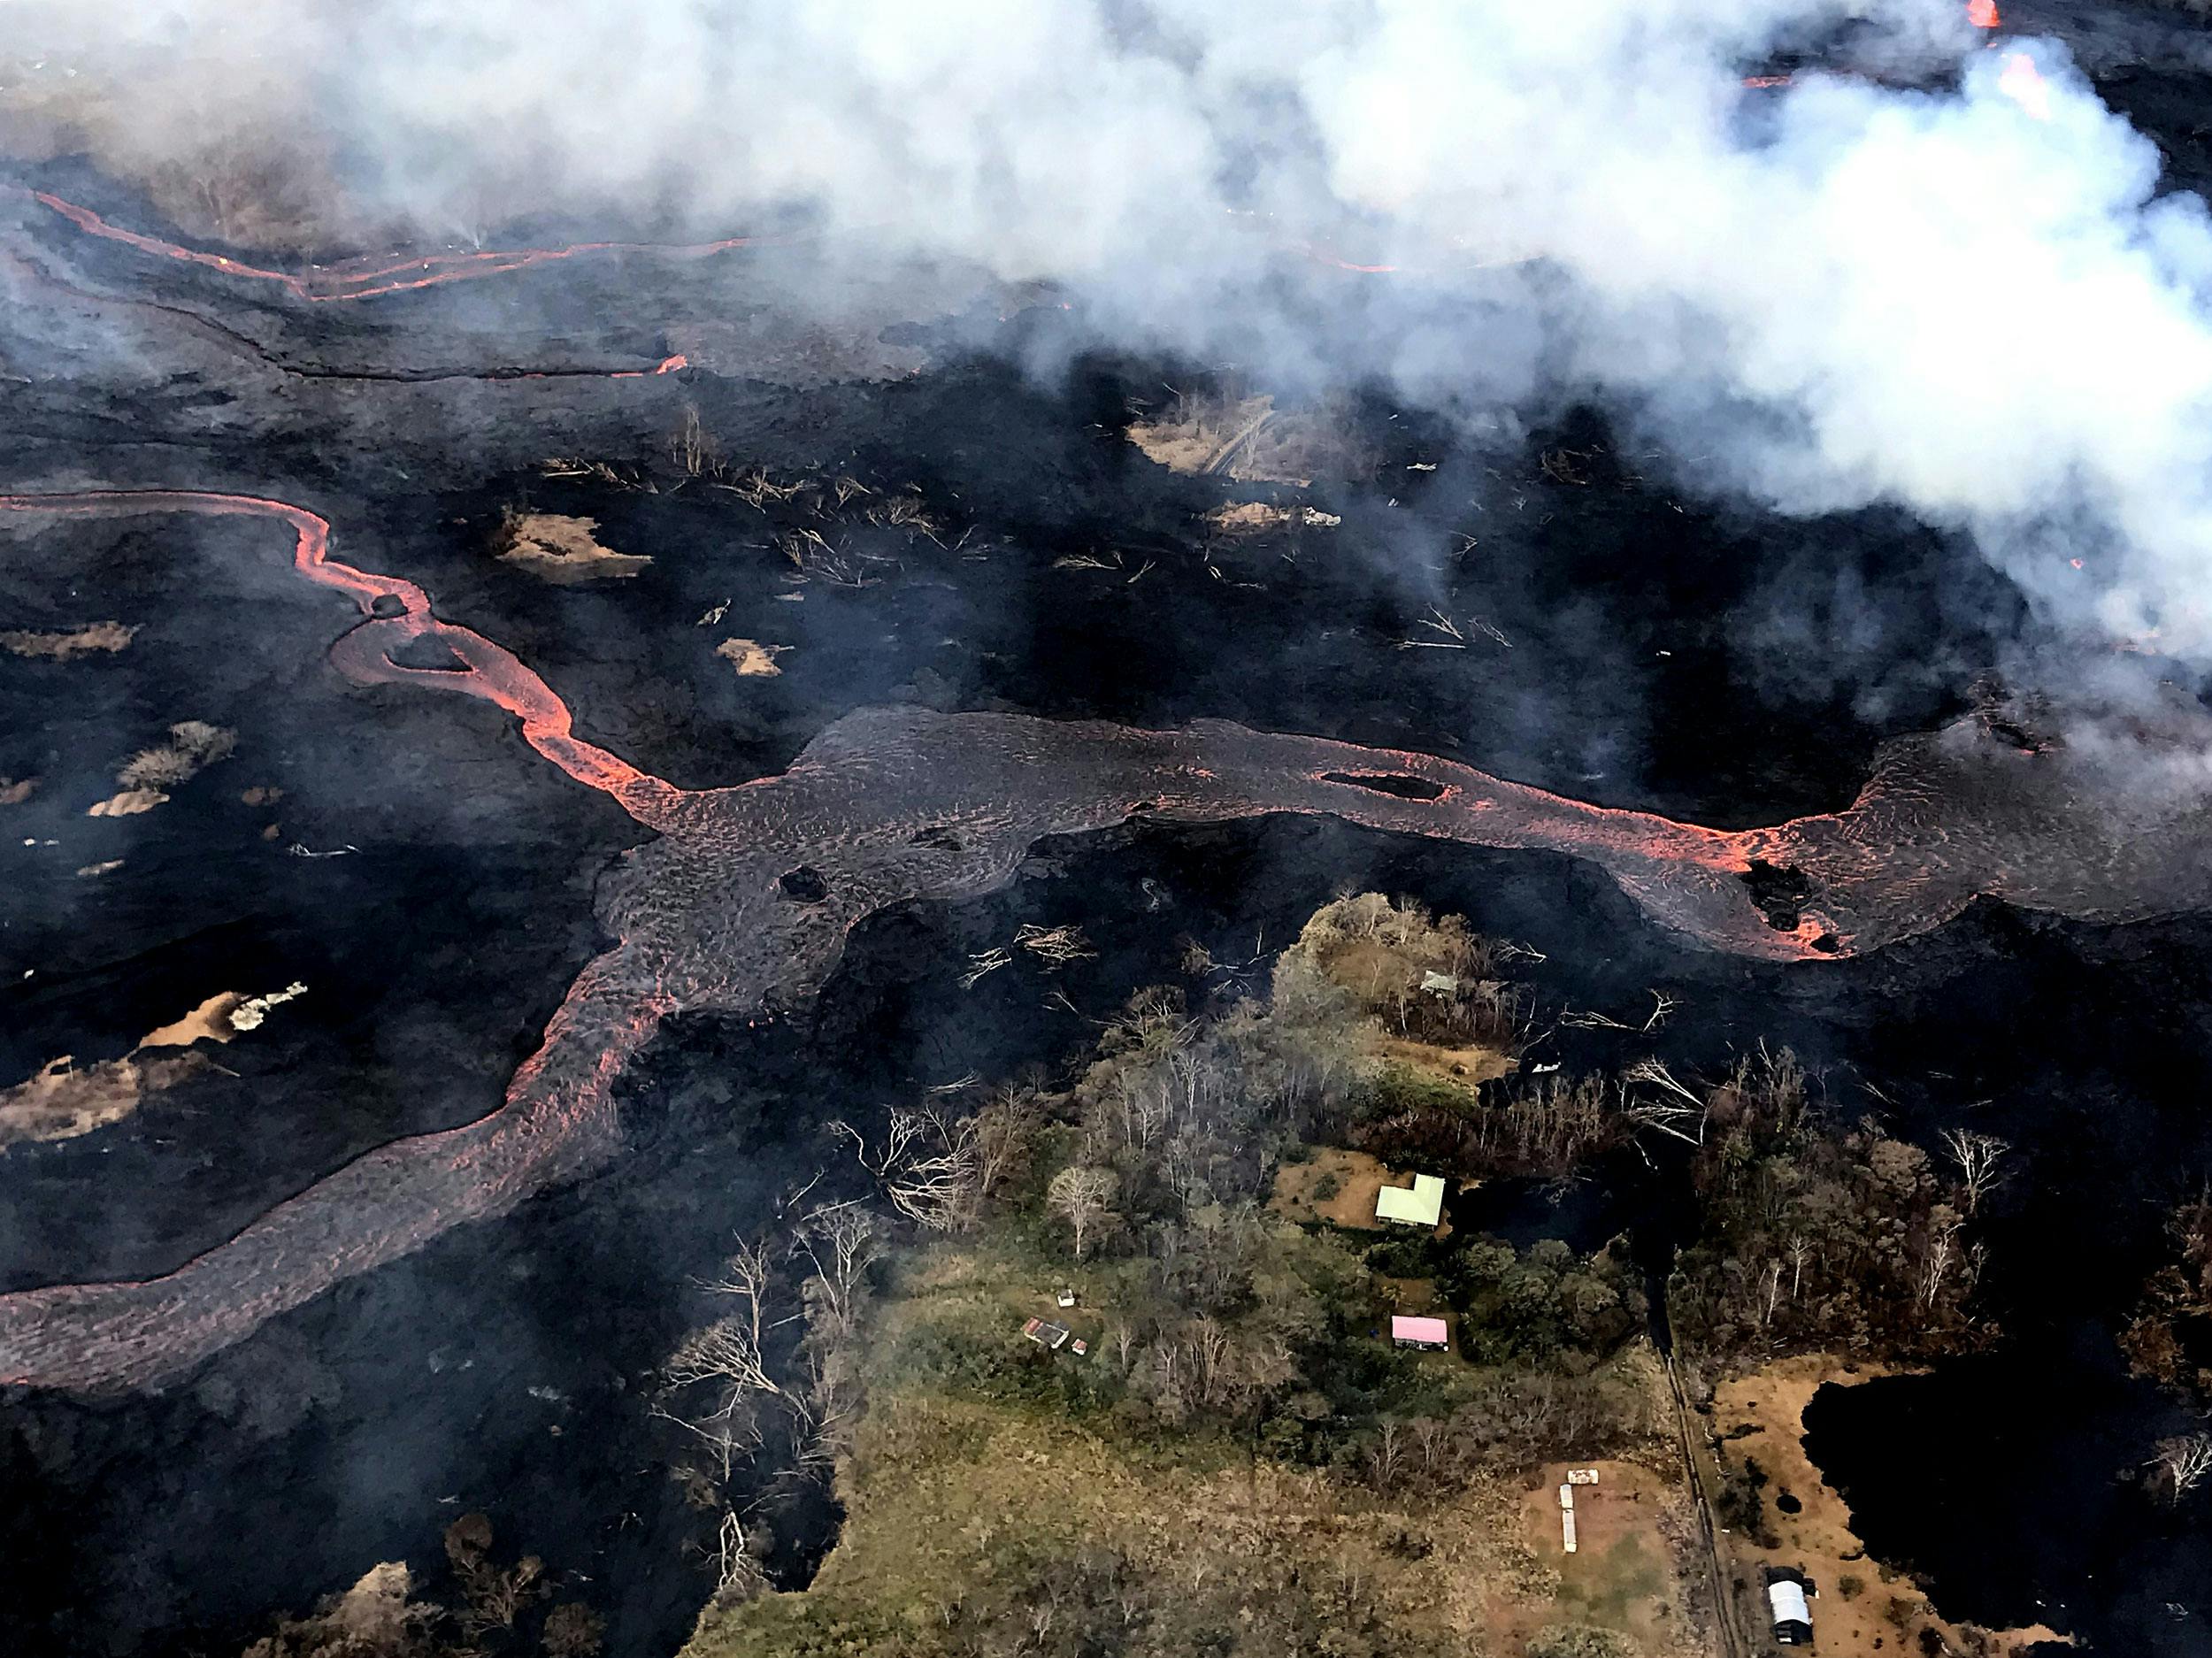 Hawaiian Cannabis Farmers Refuse to Leave Crops Amid Spreading Volcanic Lava1 Investigation: Hospitals Are Denying Organ Transplants To Marijuana Patients